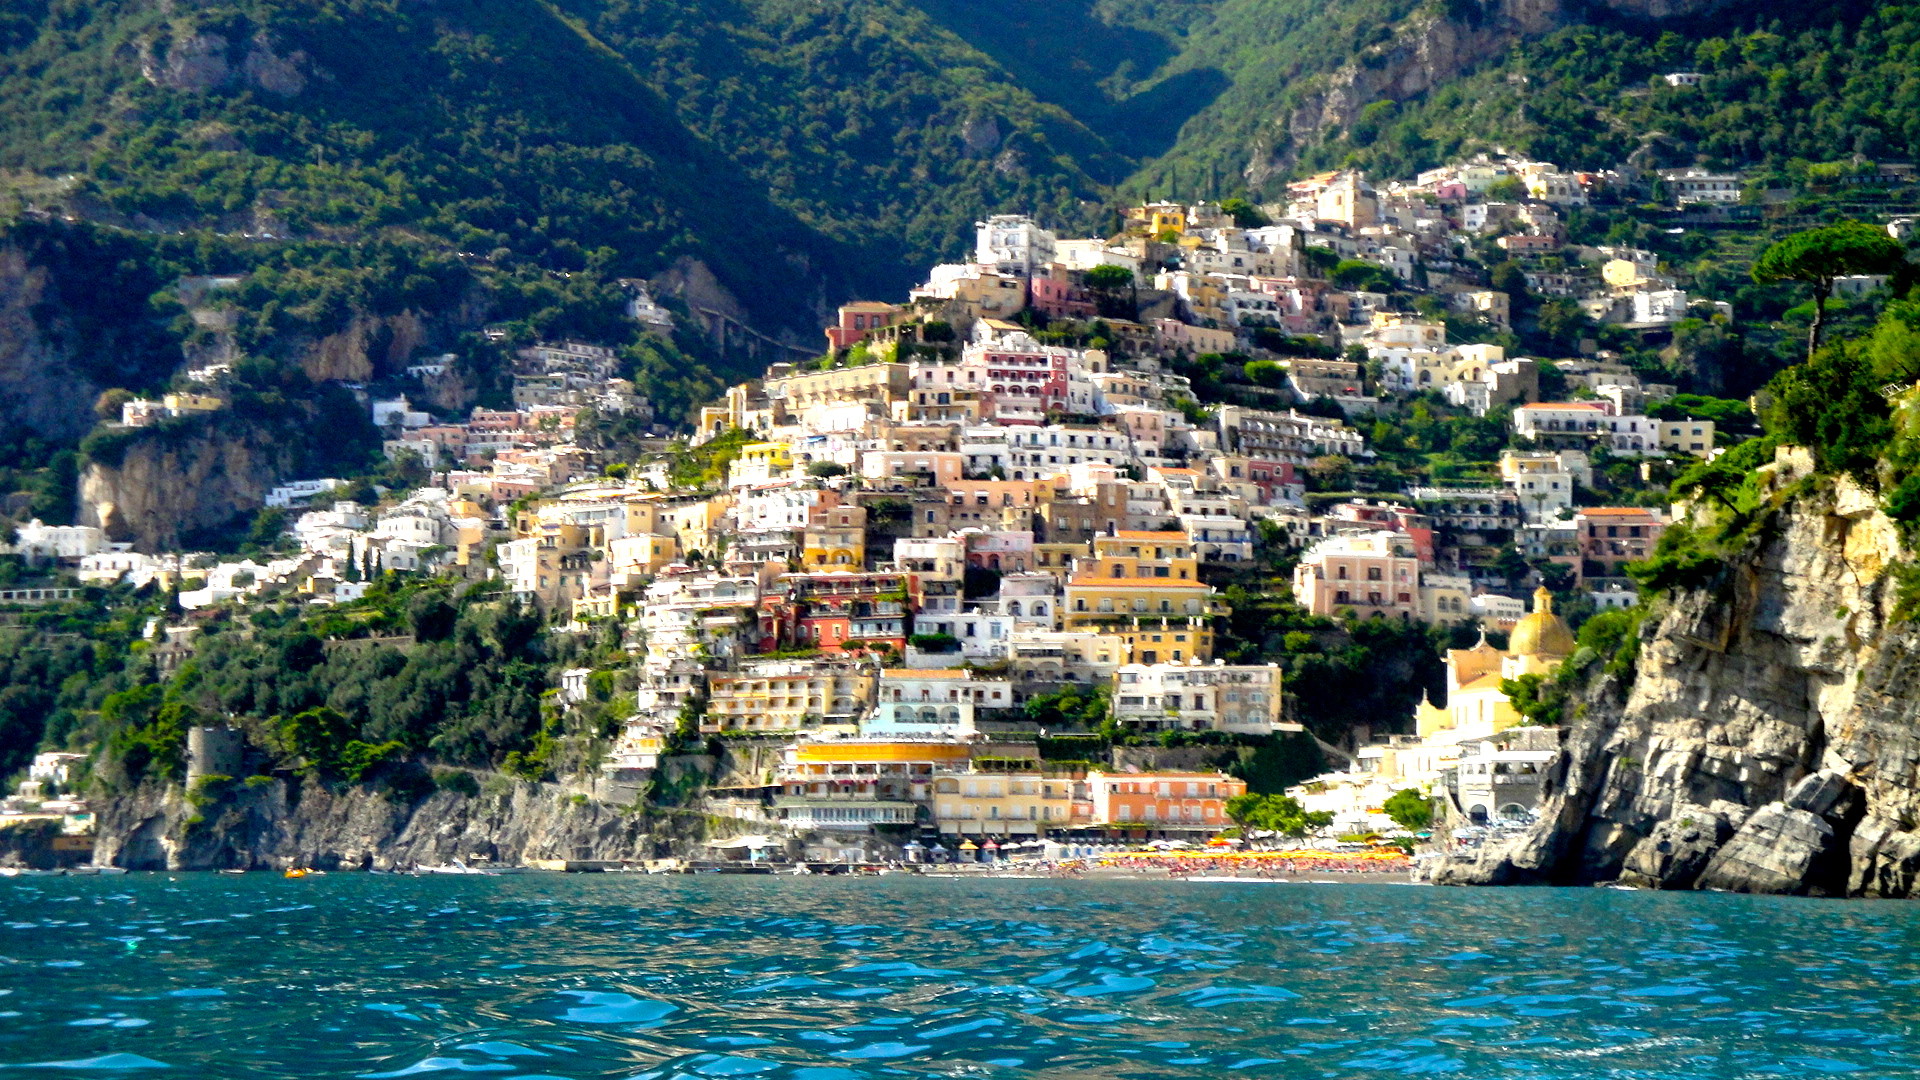 1920x1080 Positano is a fishing village on the other side of the peninsula that is  built right into the seaside cliffs, much like Cinque Terre.